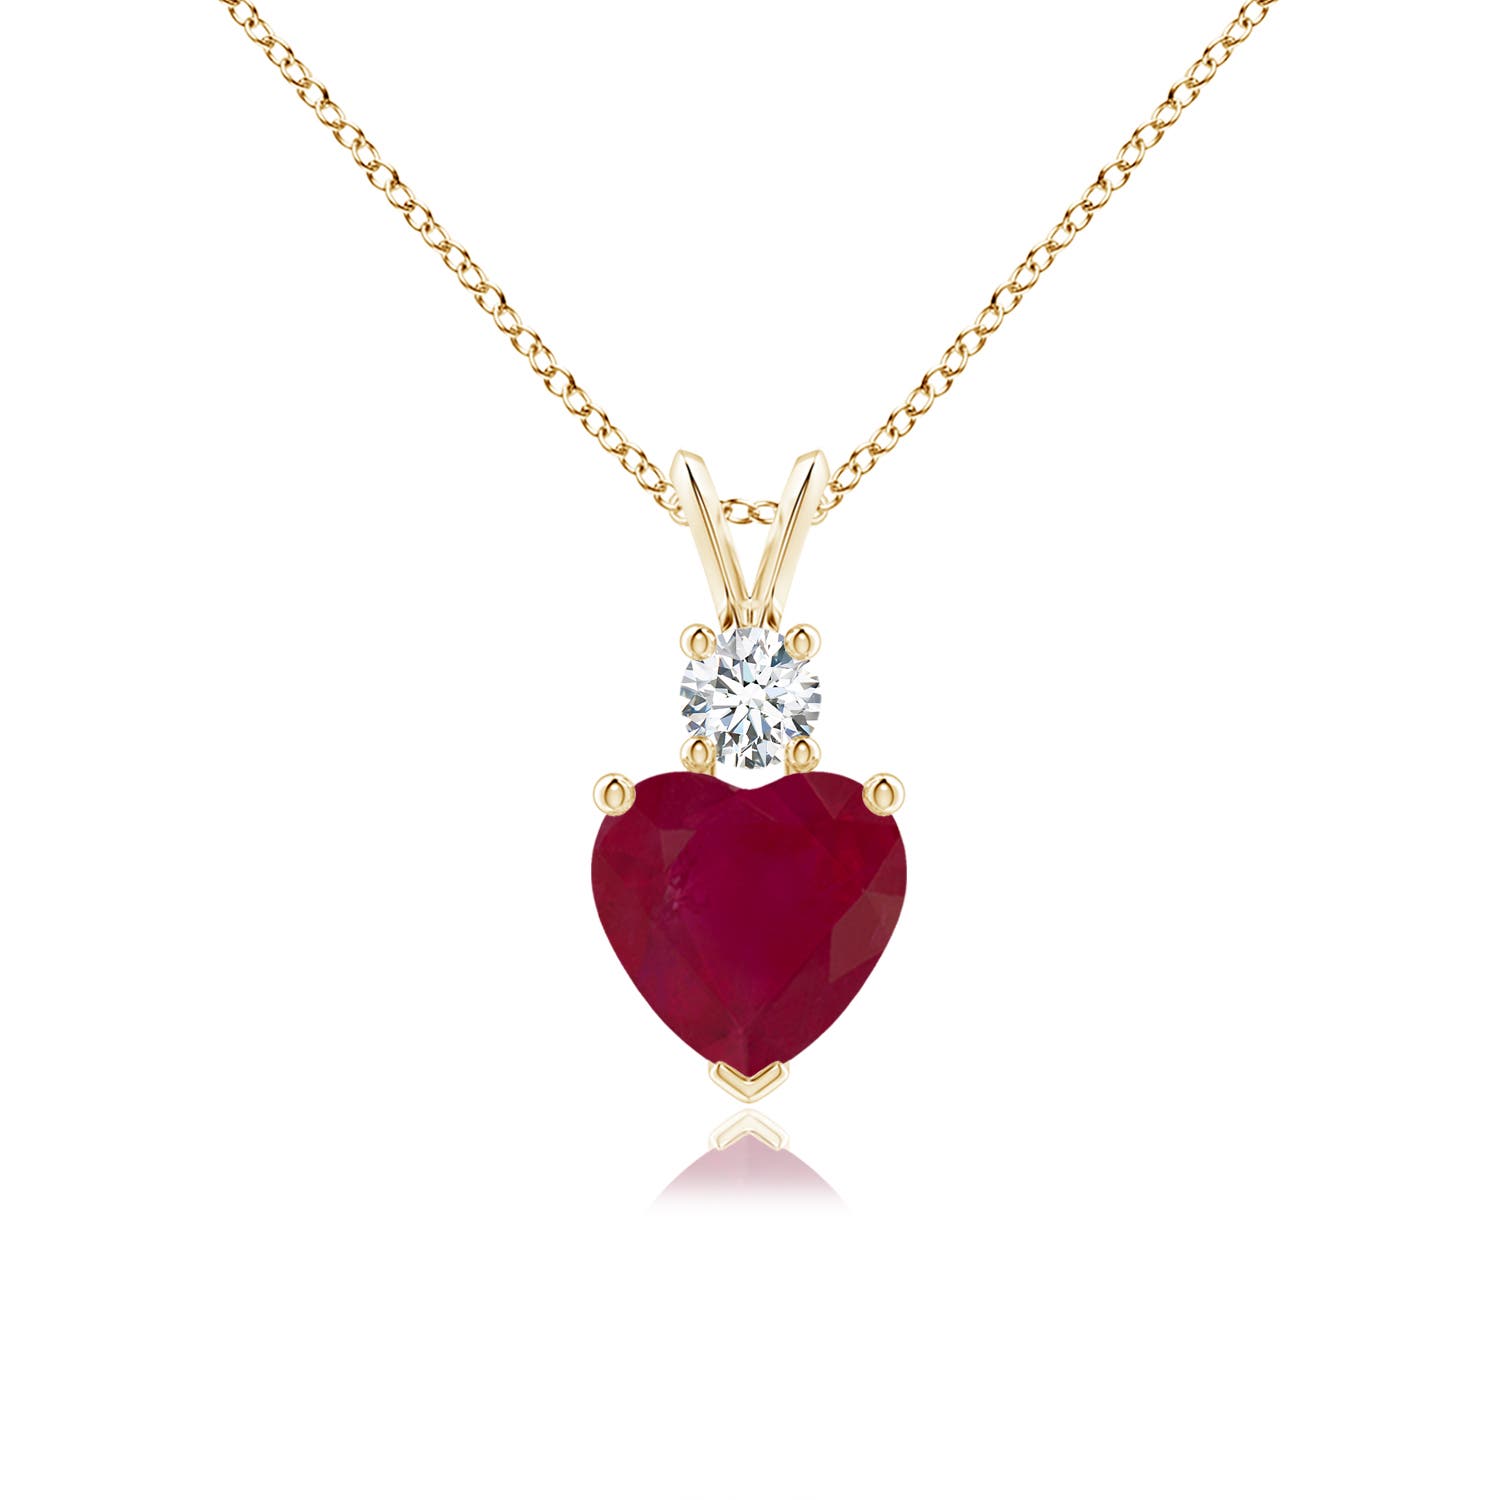 A - Ruby / 1.8 CT / 14 KT Yellow Gold